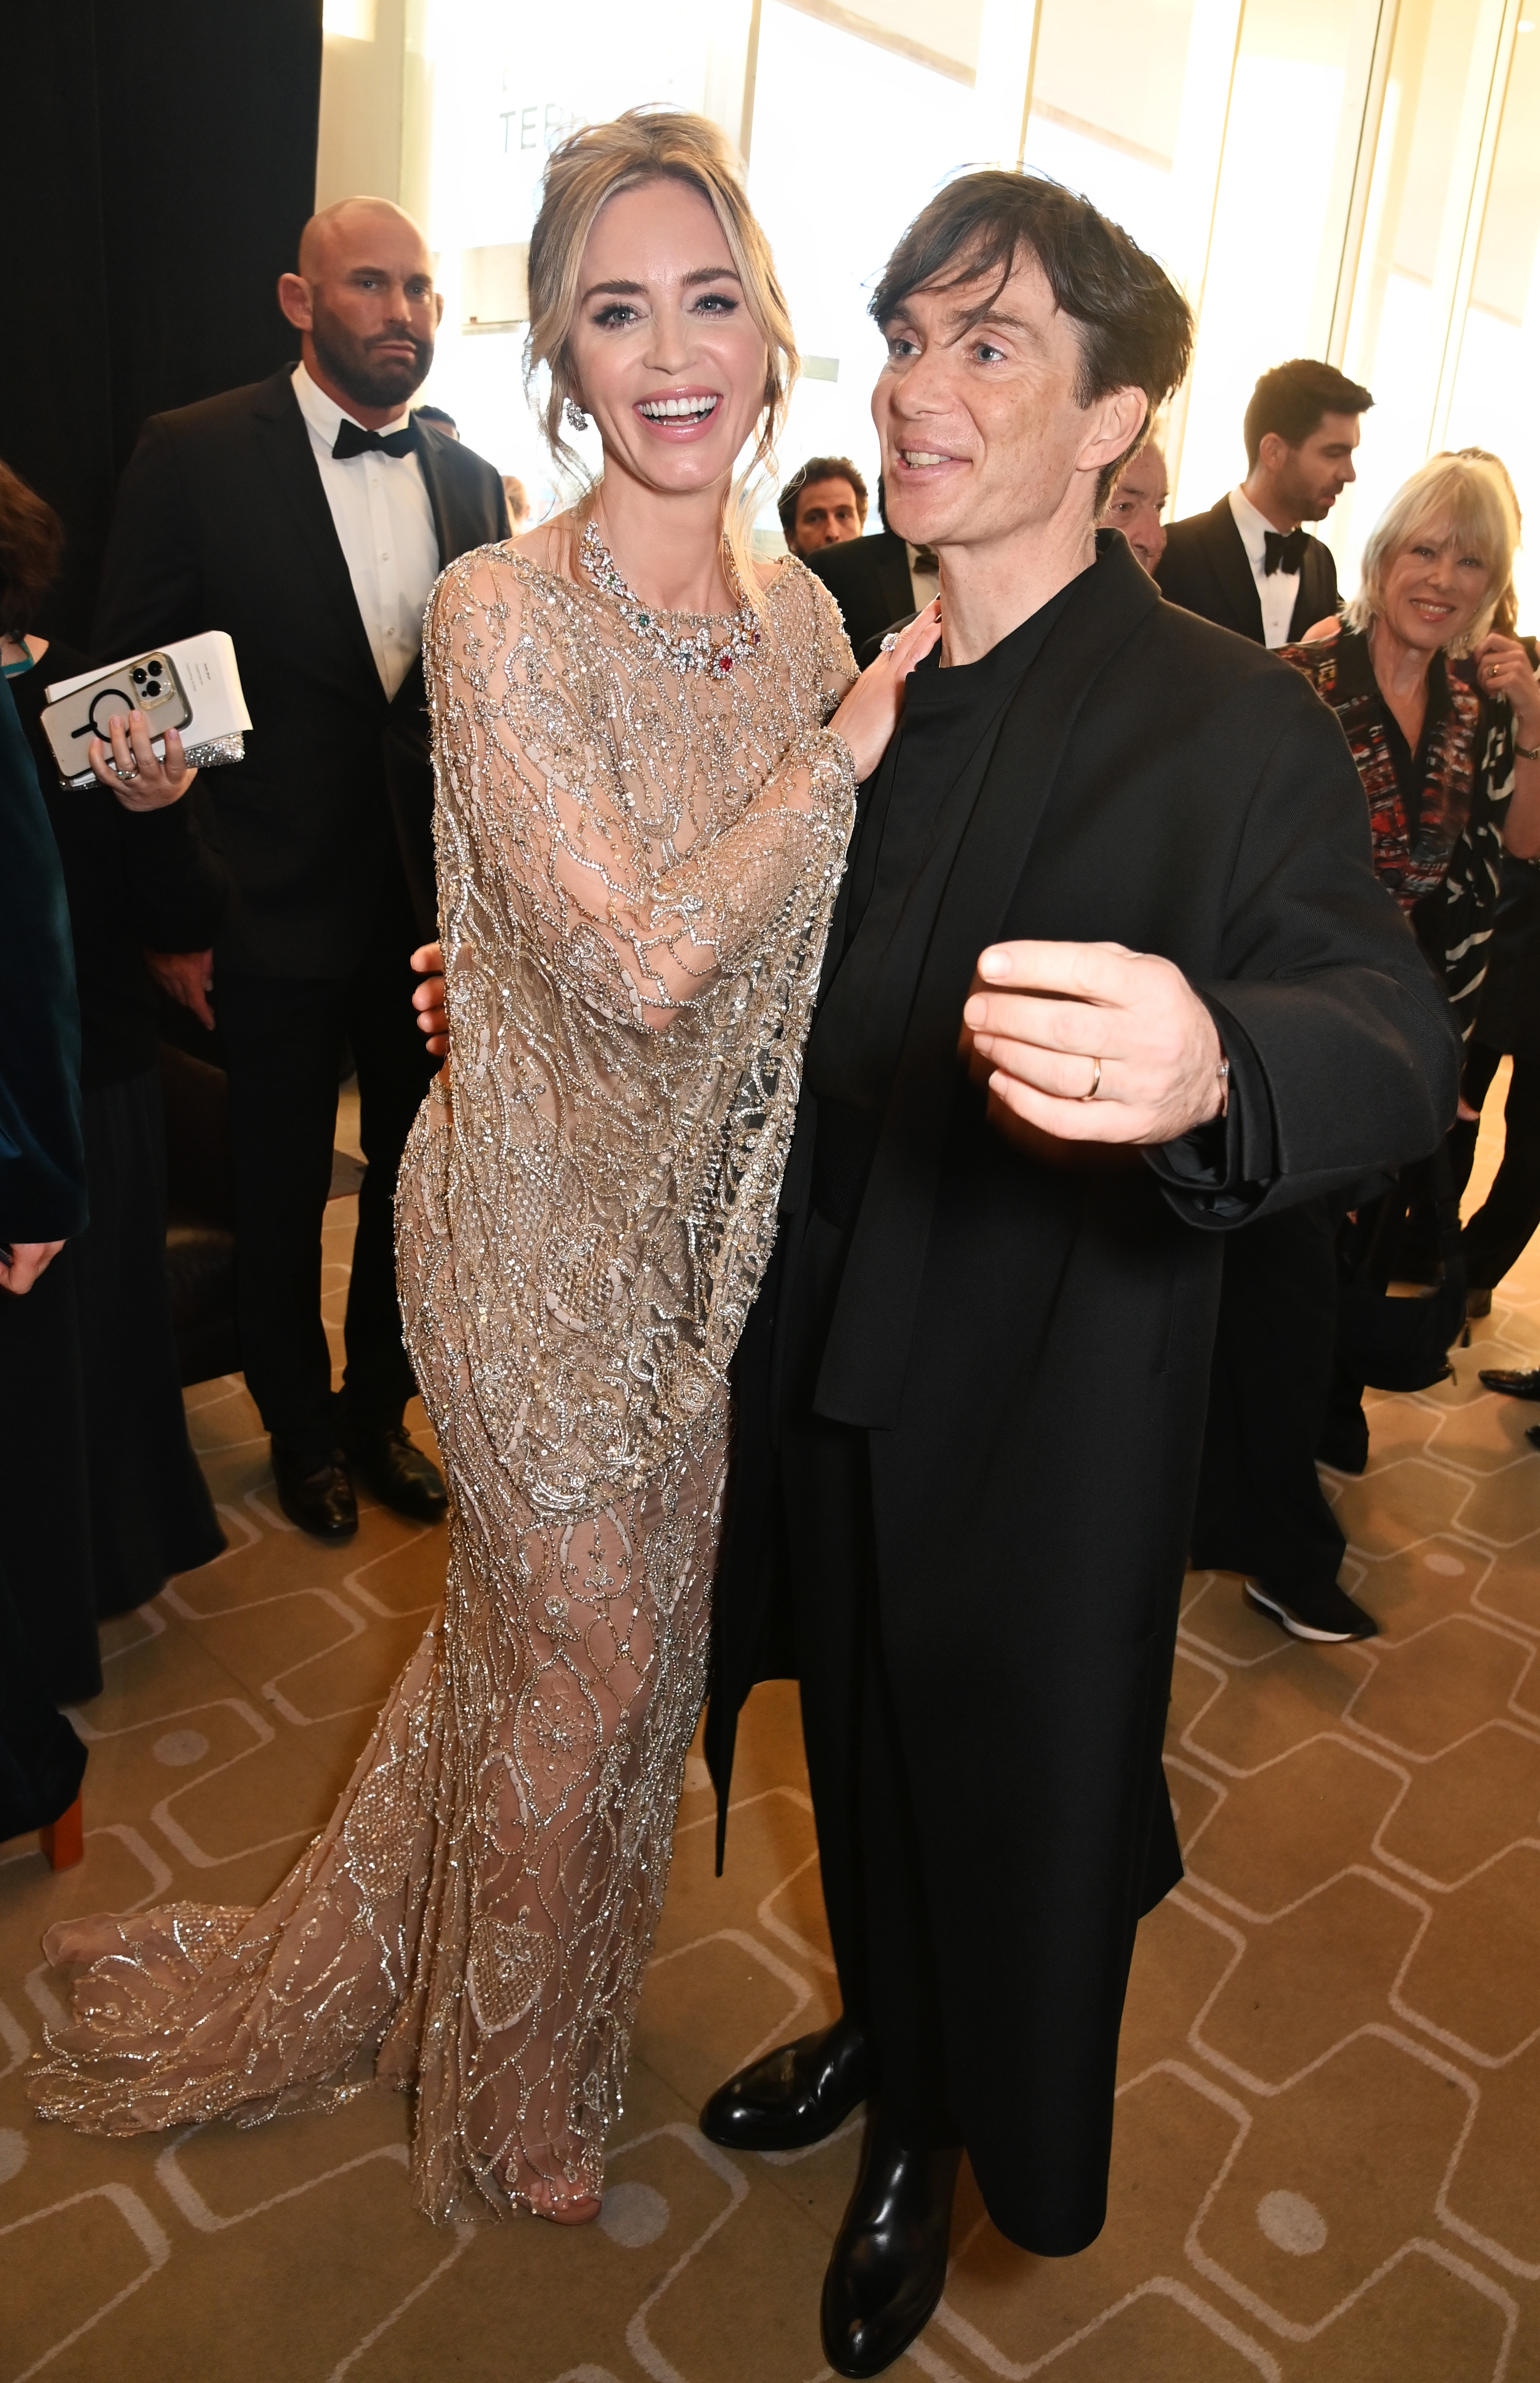 Cillian Murphy with co-star Emily Blunt at the awards